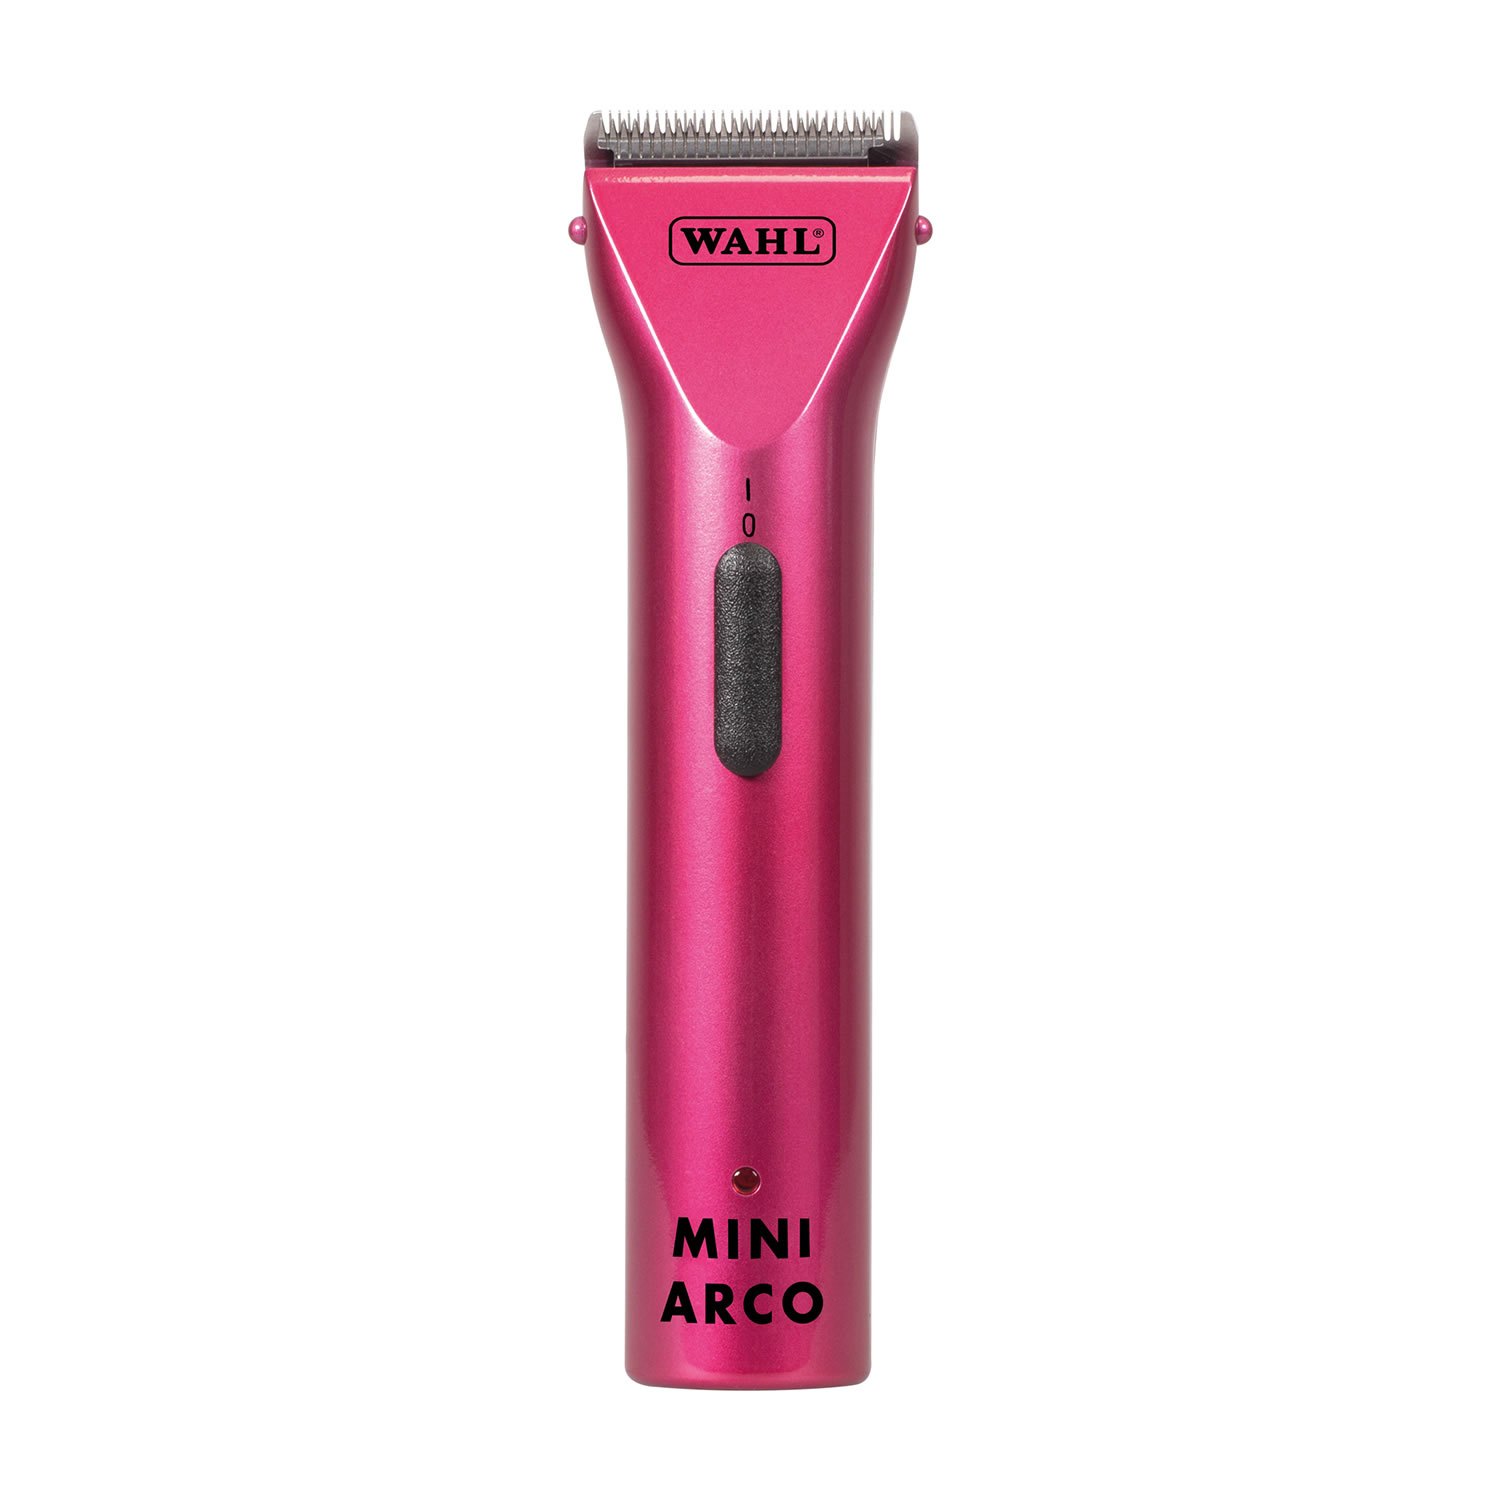 WAHL MINI ARCO TRIMMER KIT PINK